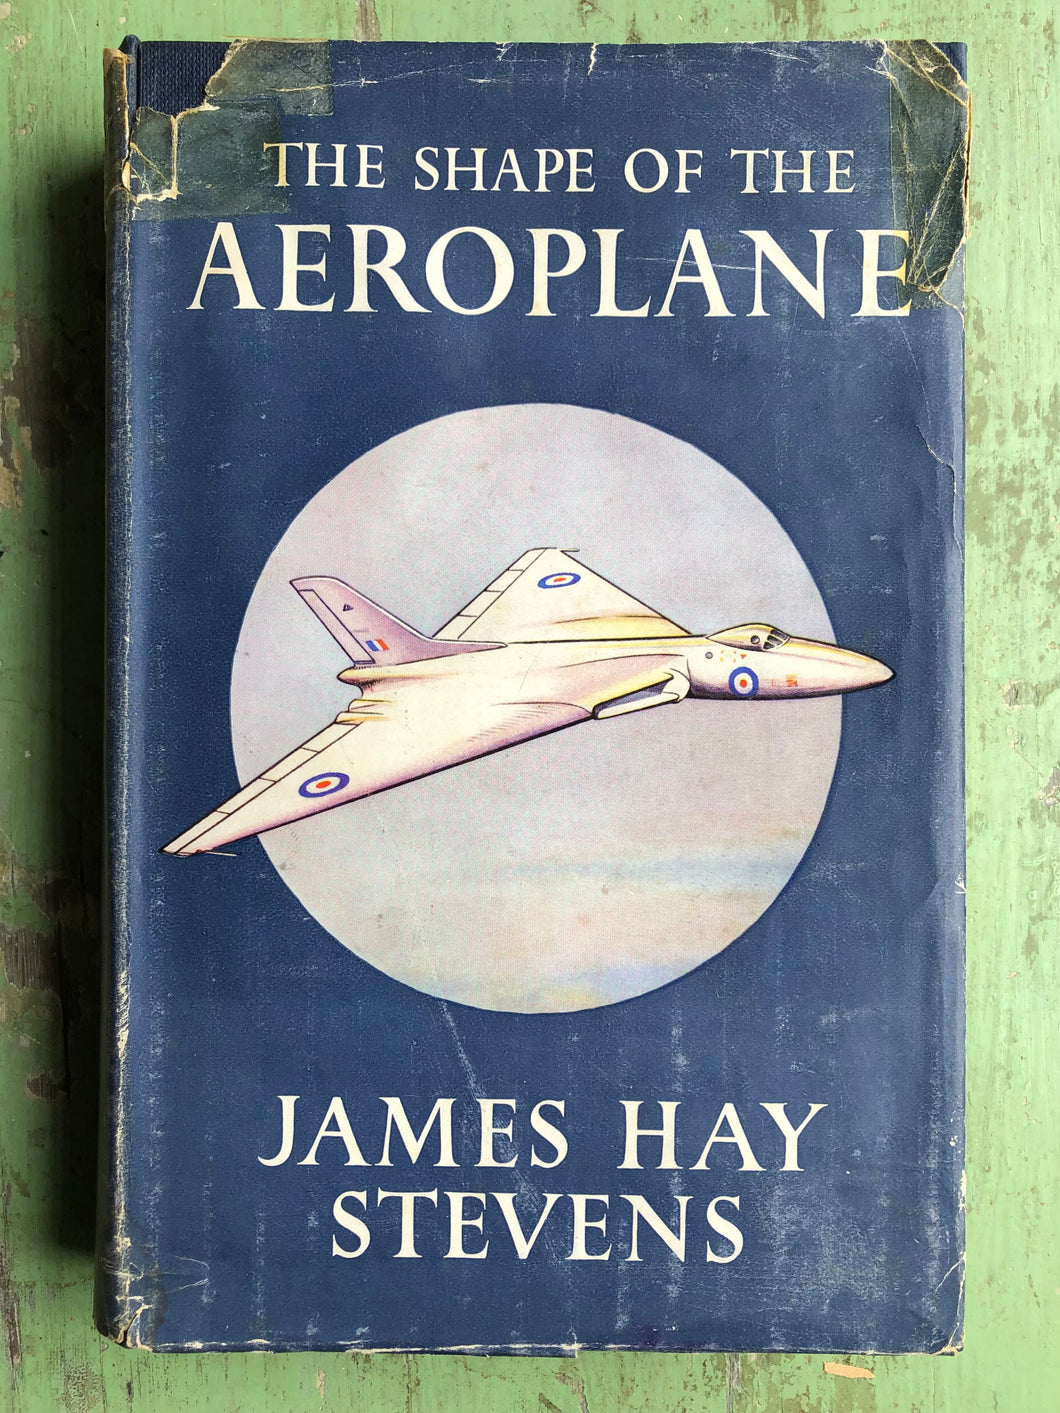 The Shape of the Aeroplane written and illustrated by James Hay Stevens